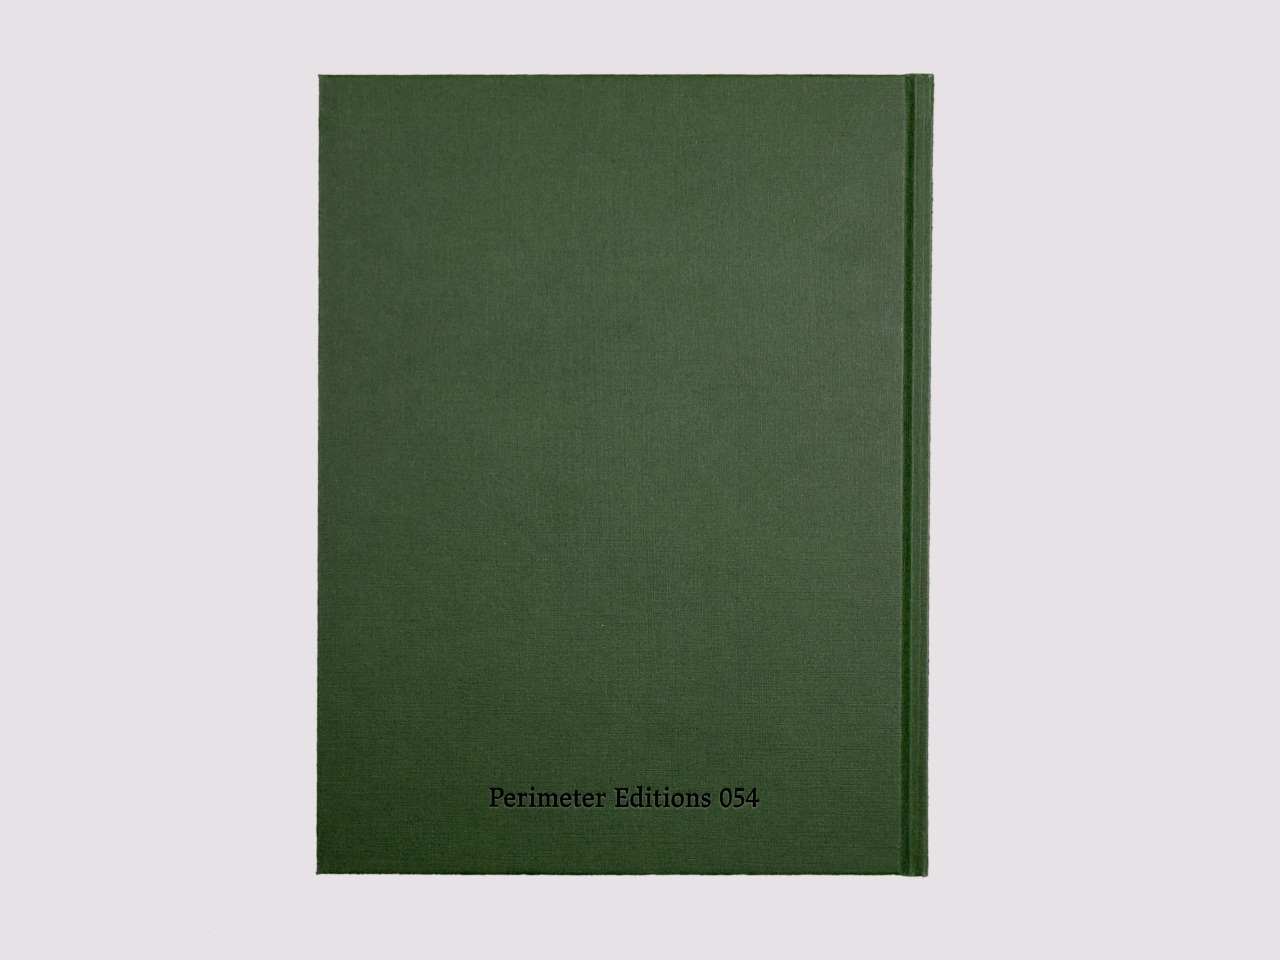 End Street/Noel McKenna published by Perimeter Editions